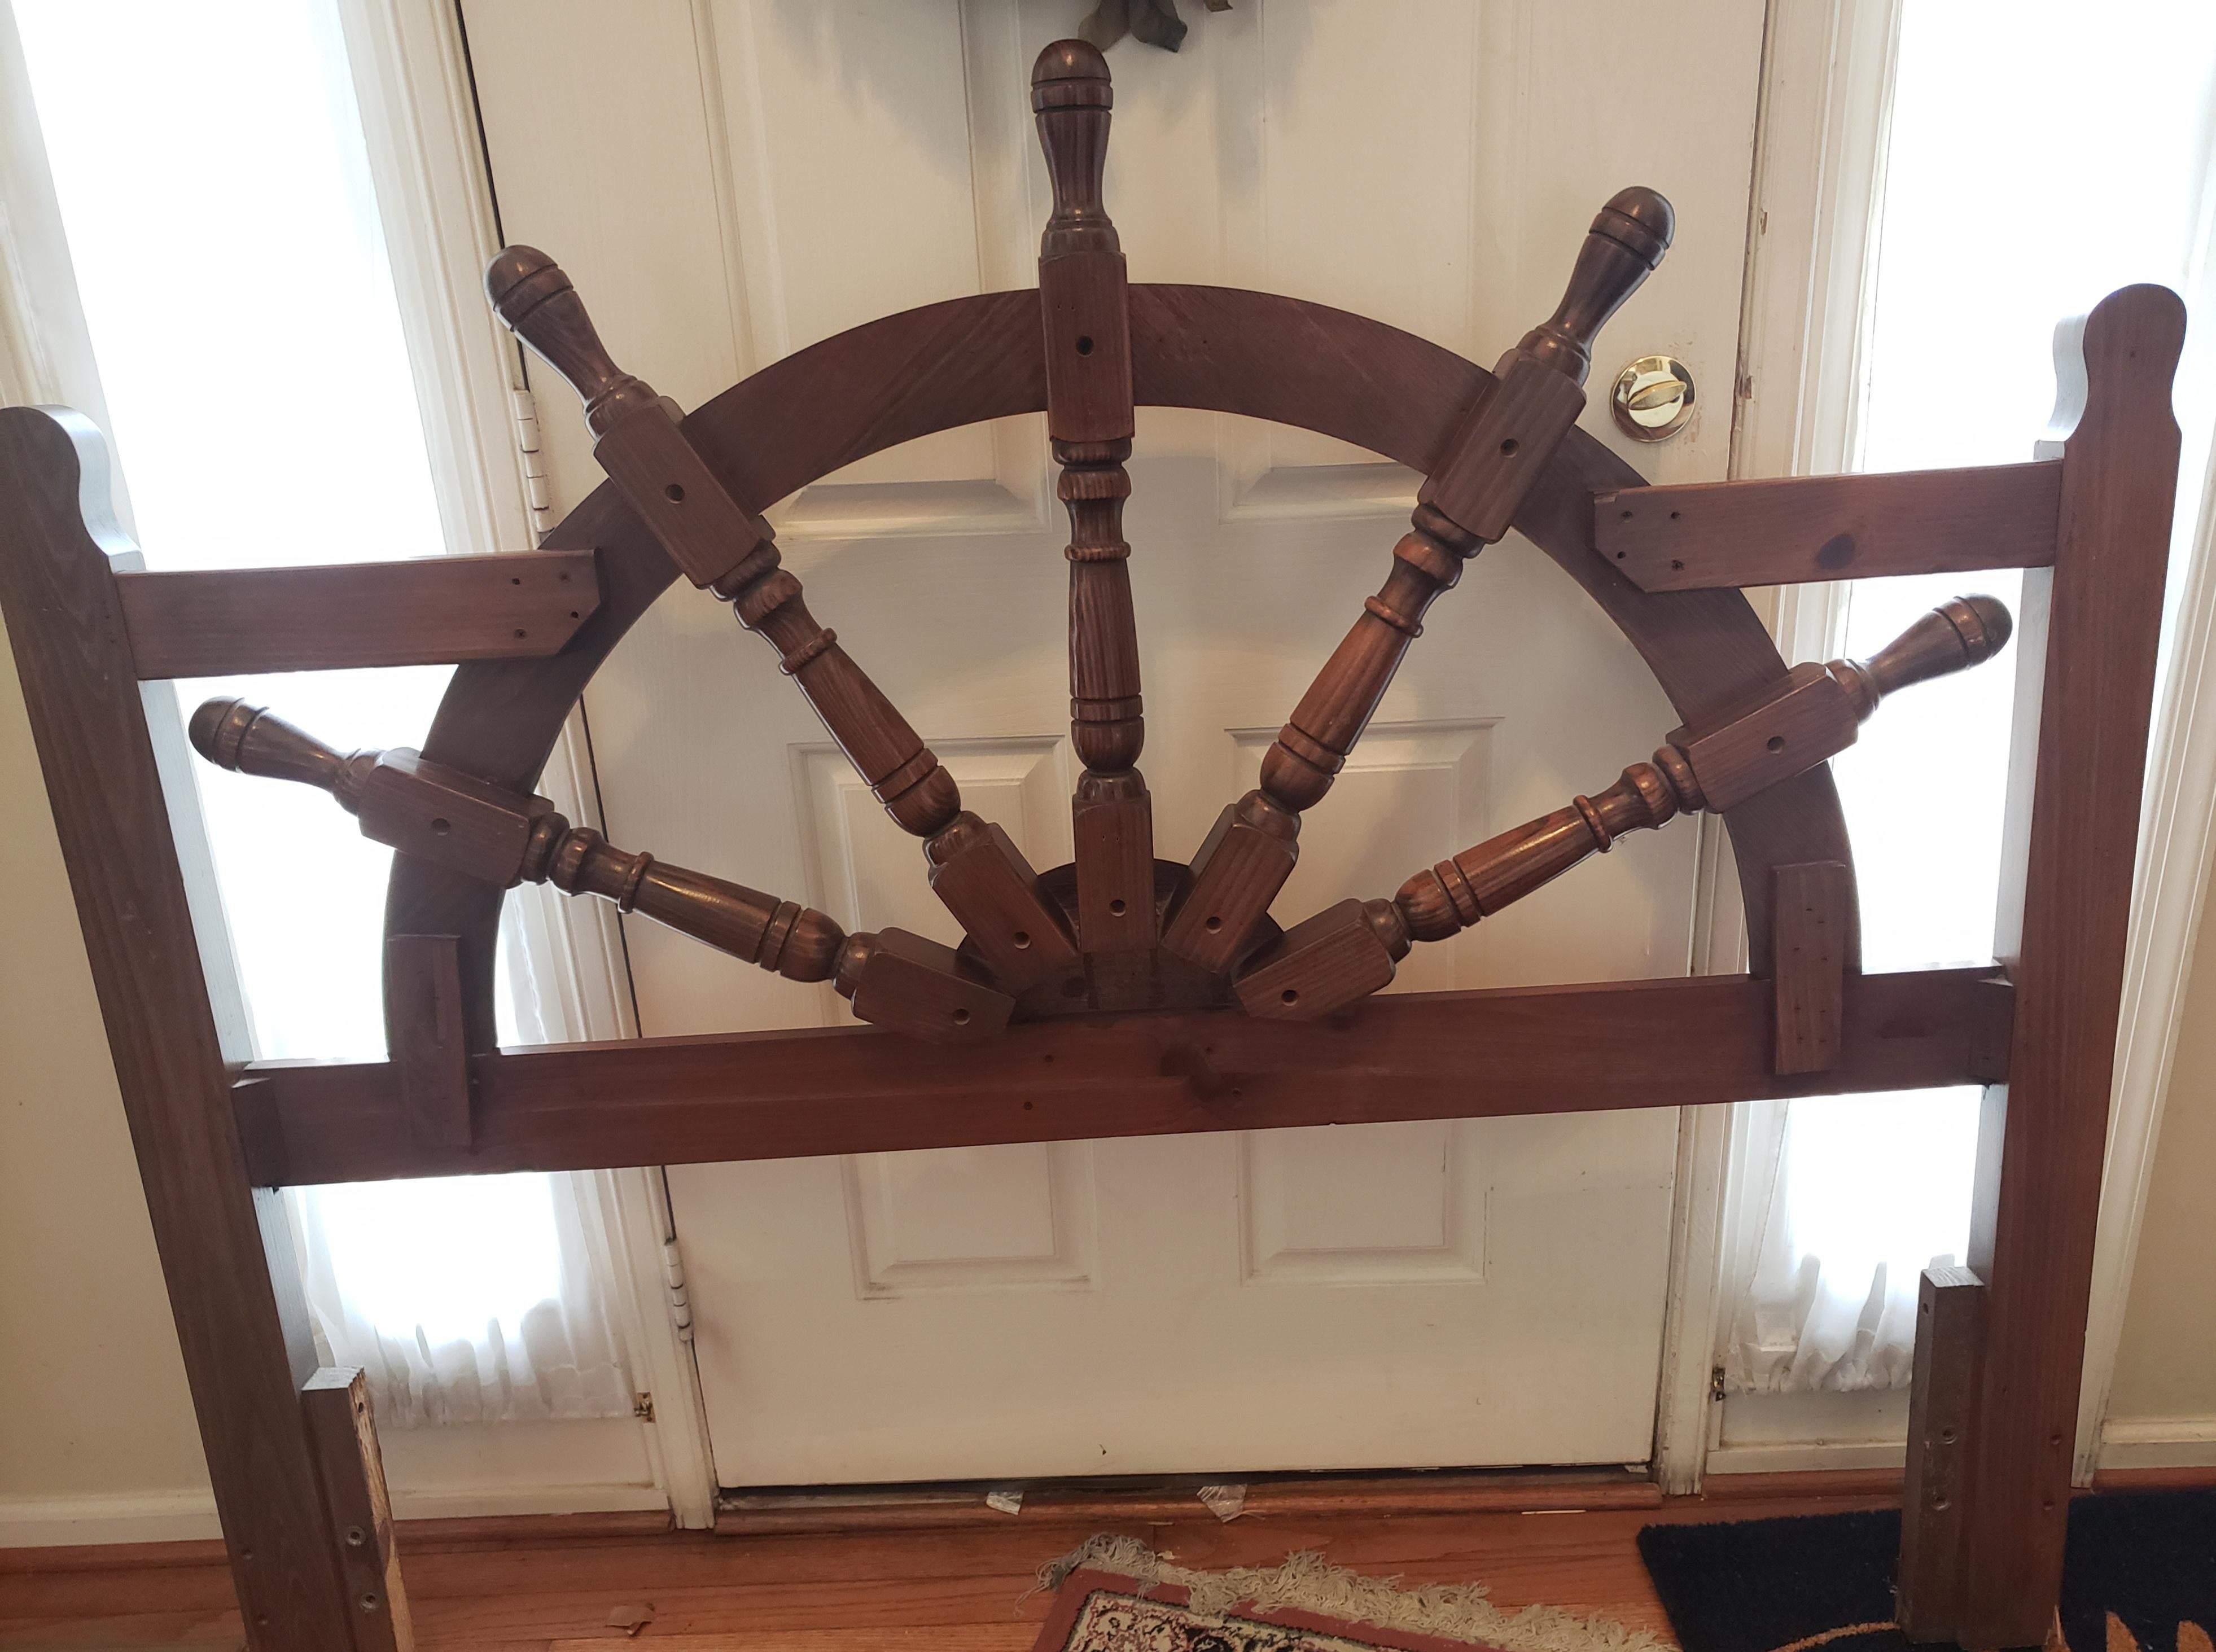 Vintage Nautical Ship Wheel Queen or Full Size Headboard in very good condition. 
Oak in walnut finish. 
Measures 60